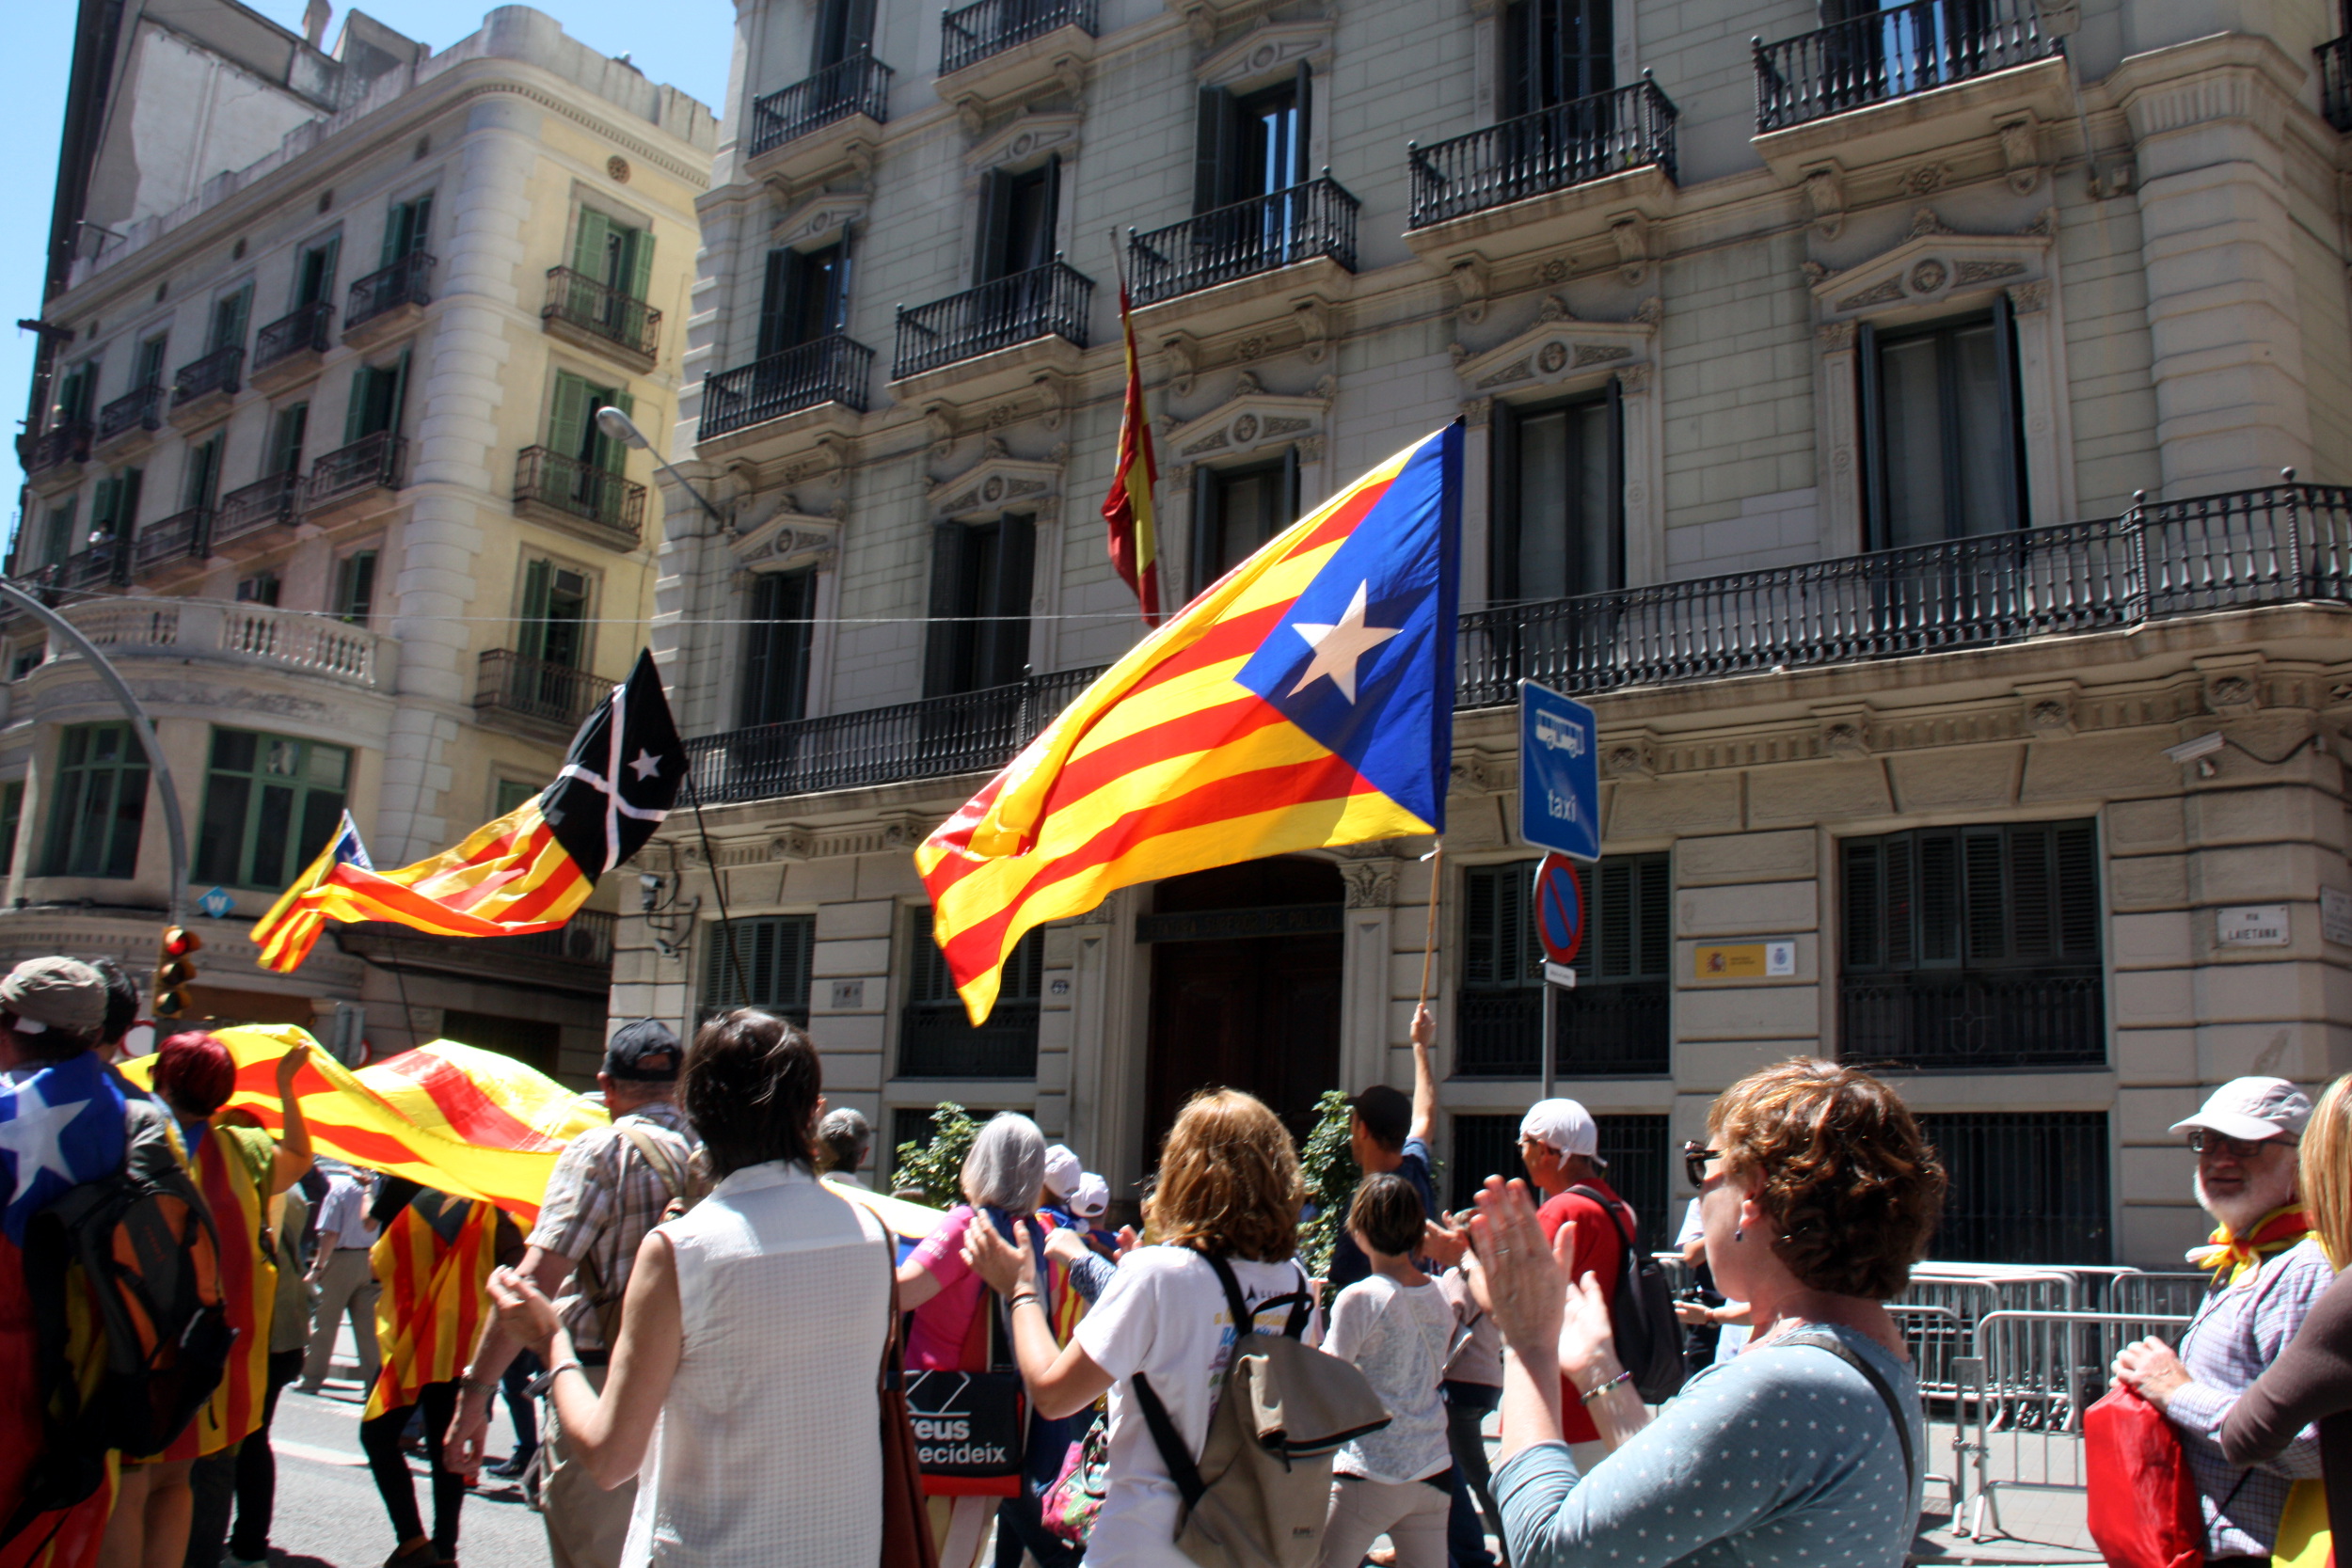 Pro-independence supporters demonstrating in front of a police station displaying the Spanish flag (by ACN)